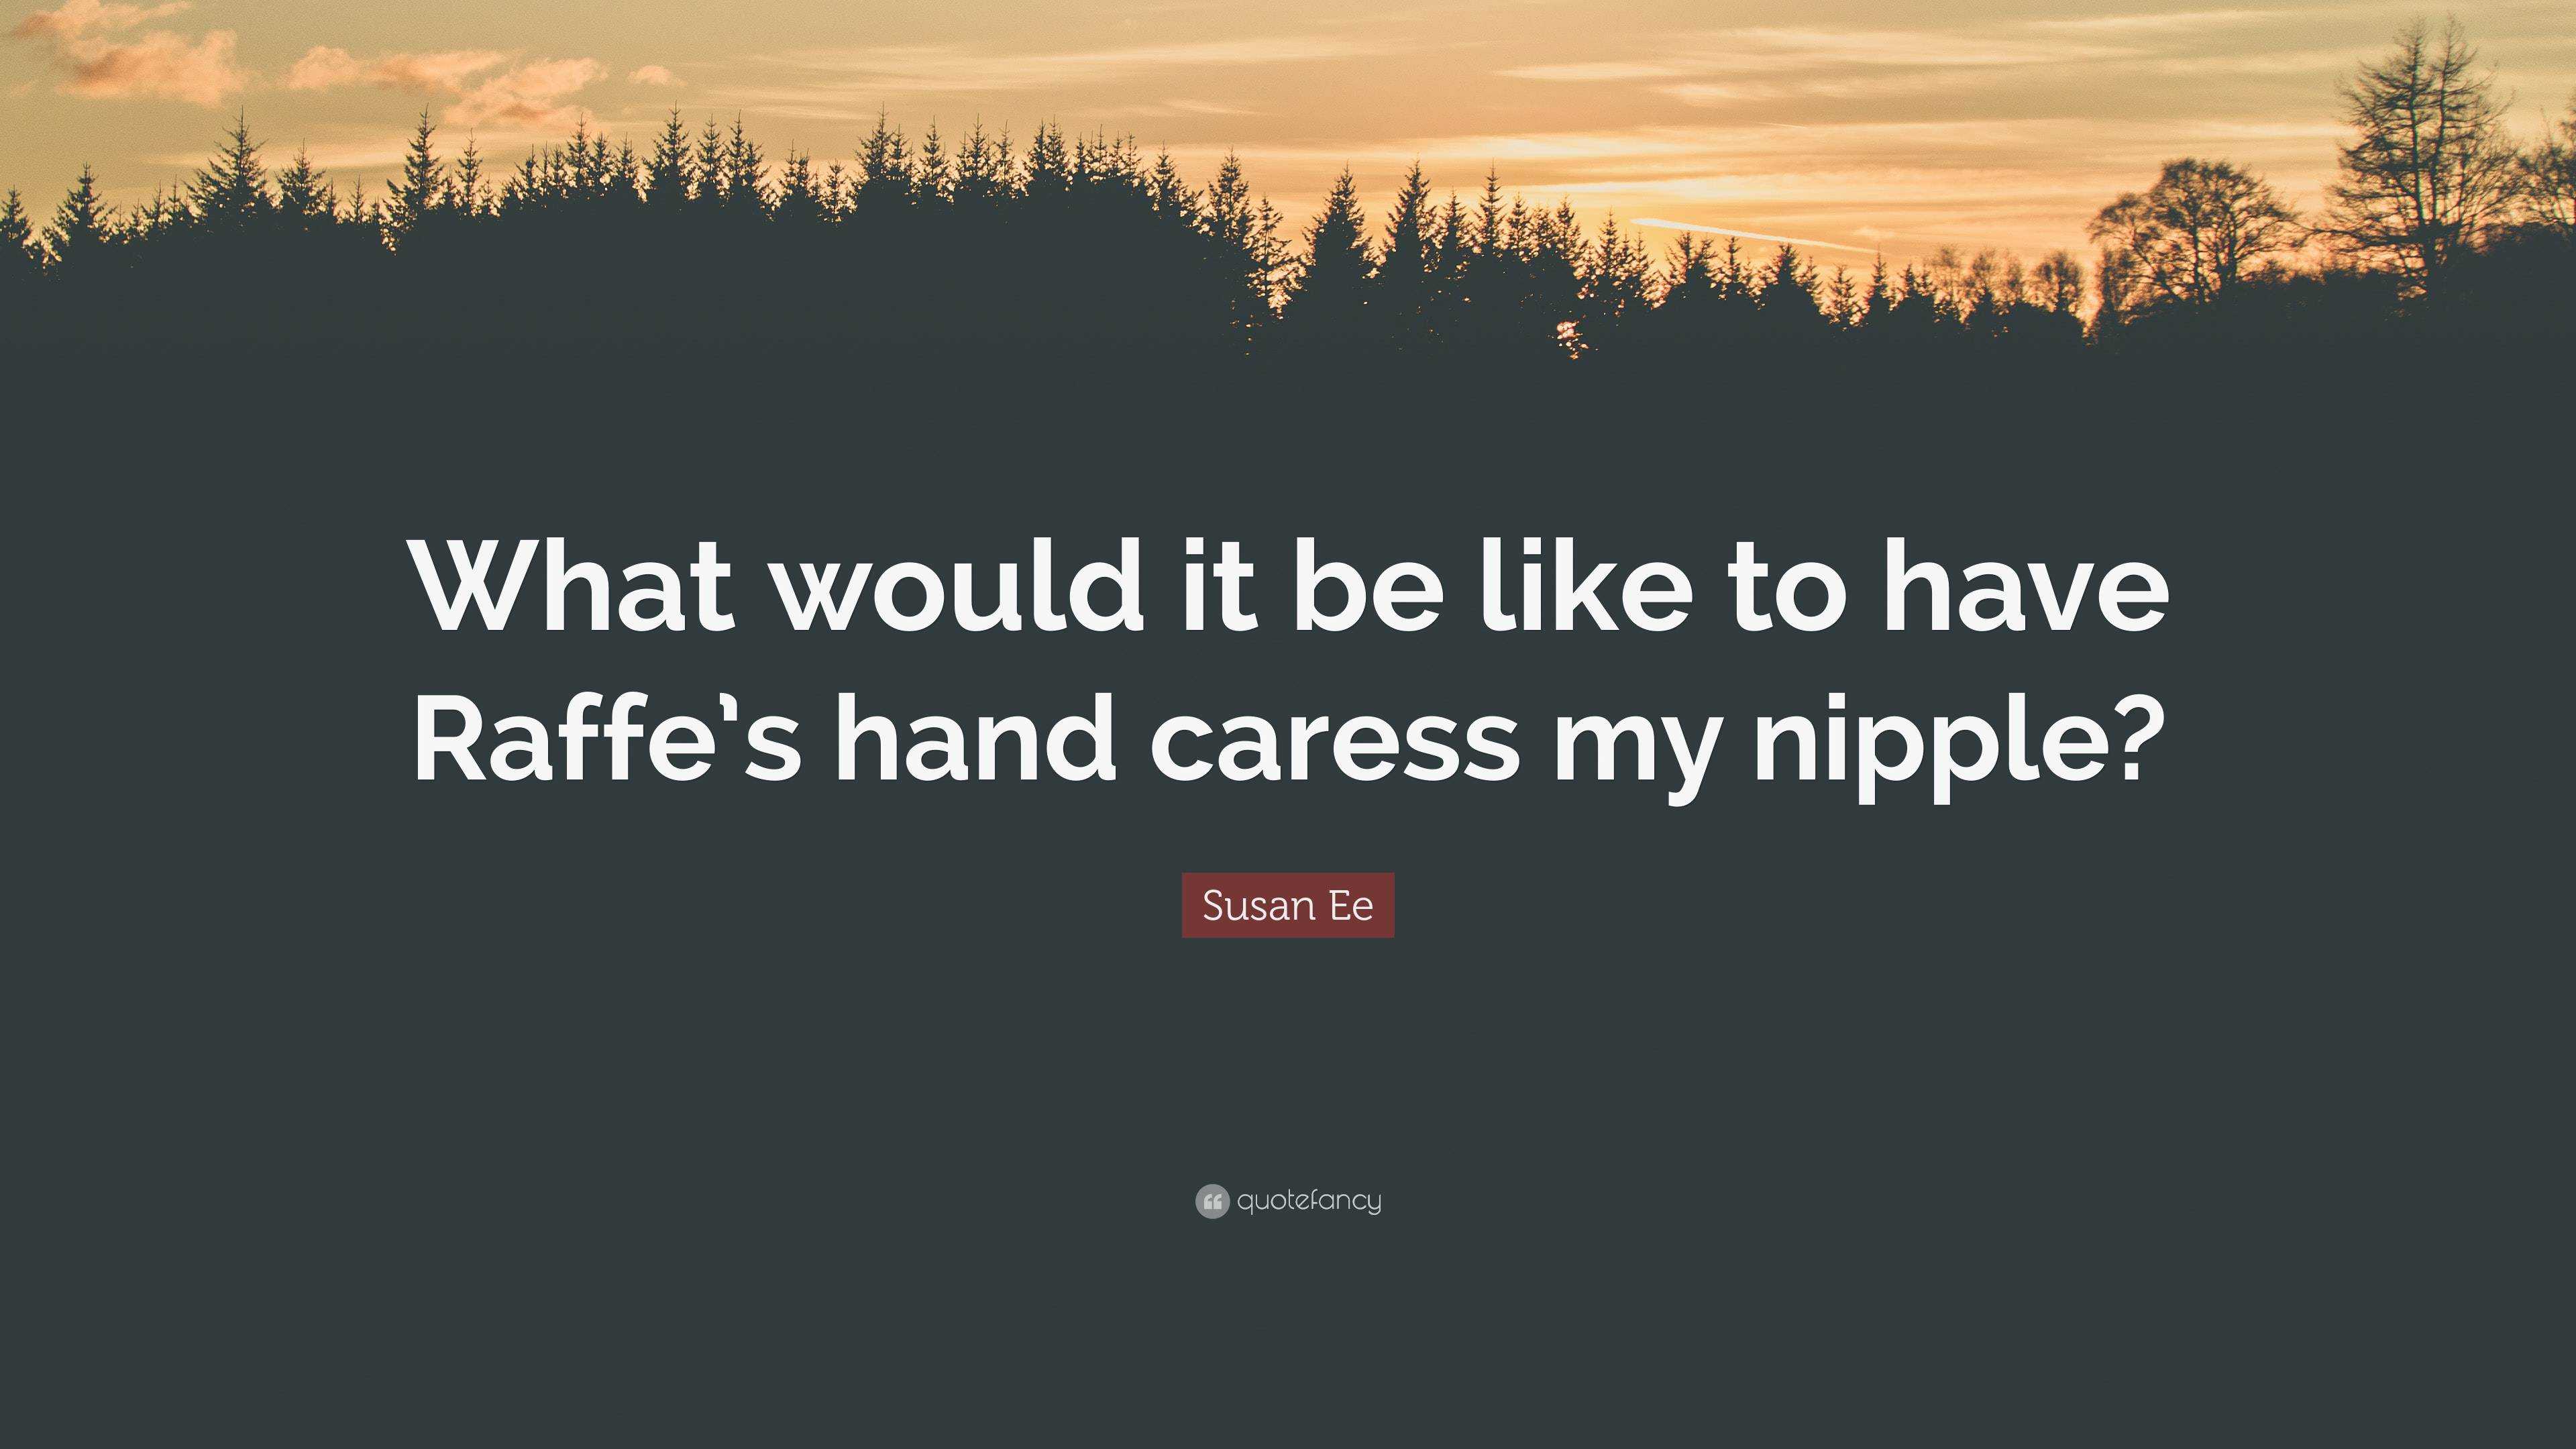 Susan Ee Quote: “What would it be like to have Raffe's hand caress my  nipple?”